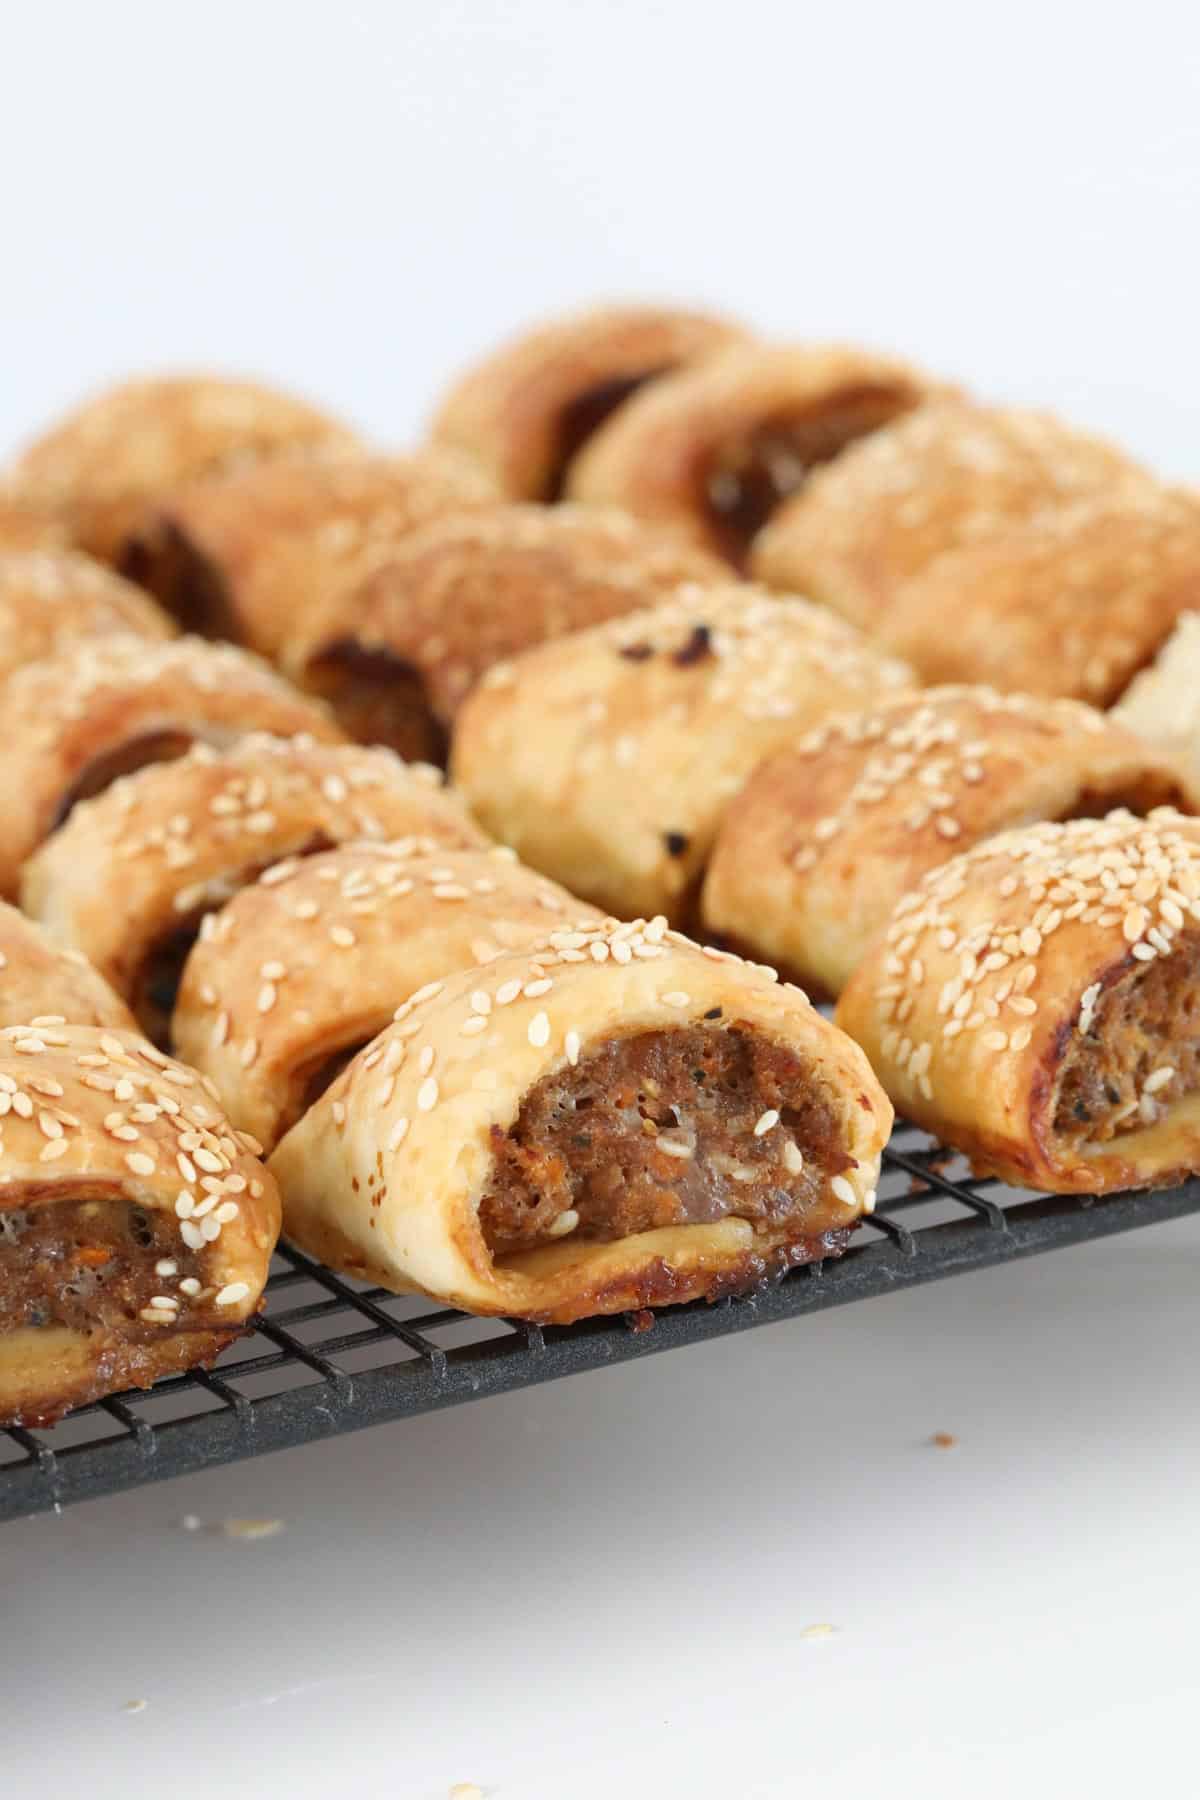 Golden baked beef sausage rolls sprinkled with sesame seeds on a wire rack